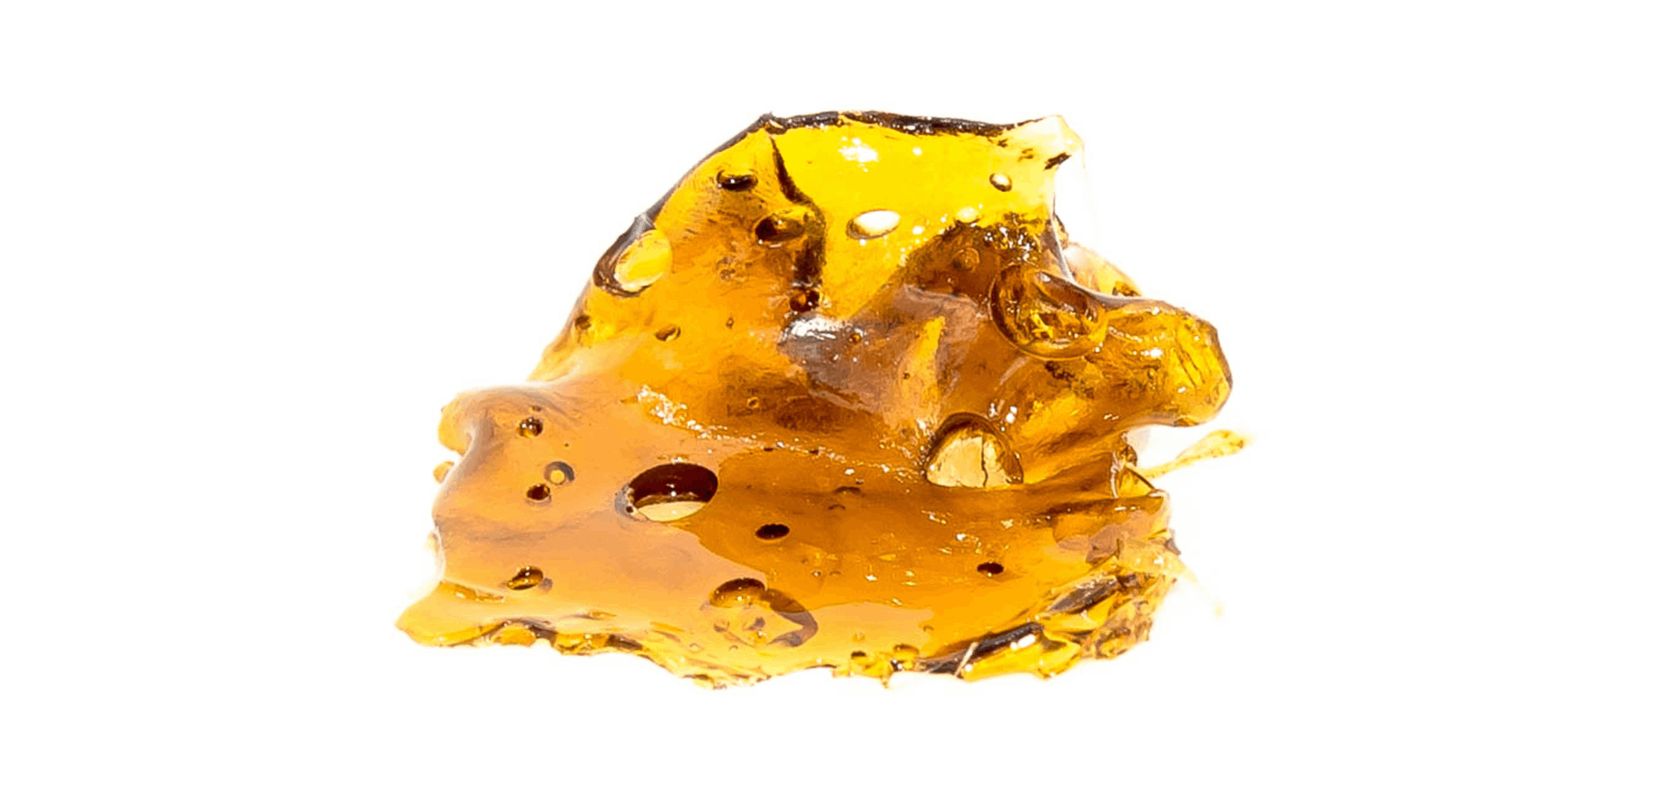 Shatter is one of the best cannabis concentrates in Canada today. This cannabis extract is of solid form and has a brittle, glass-like texture.